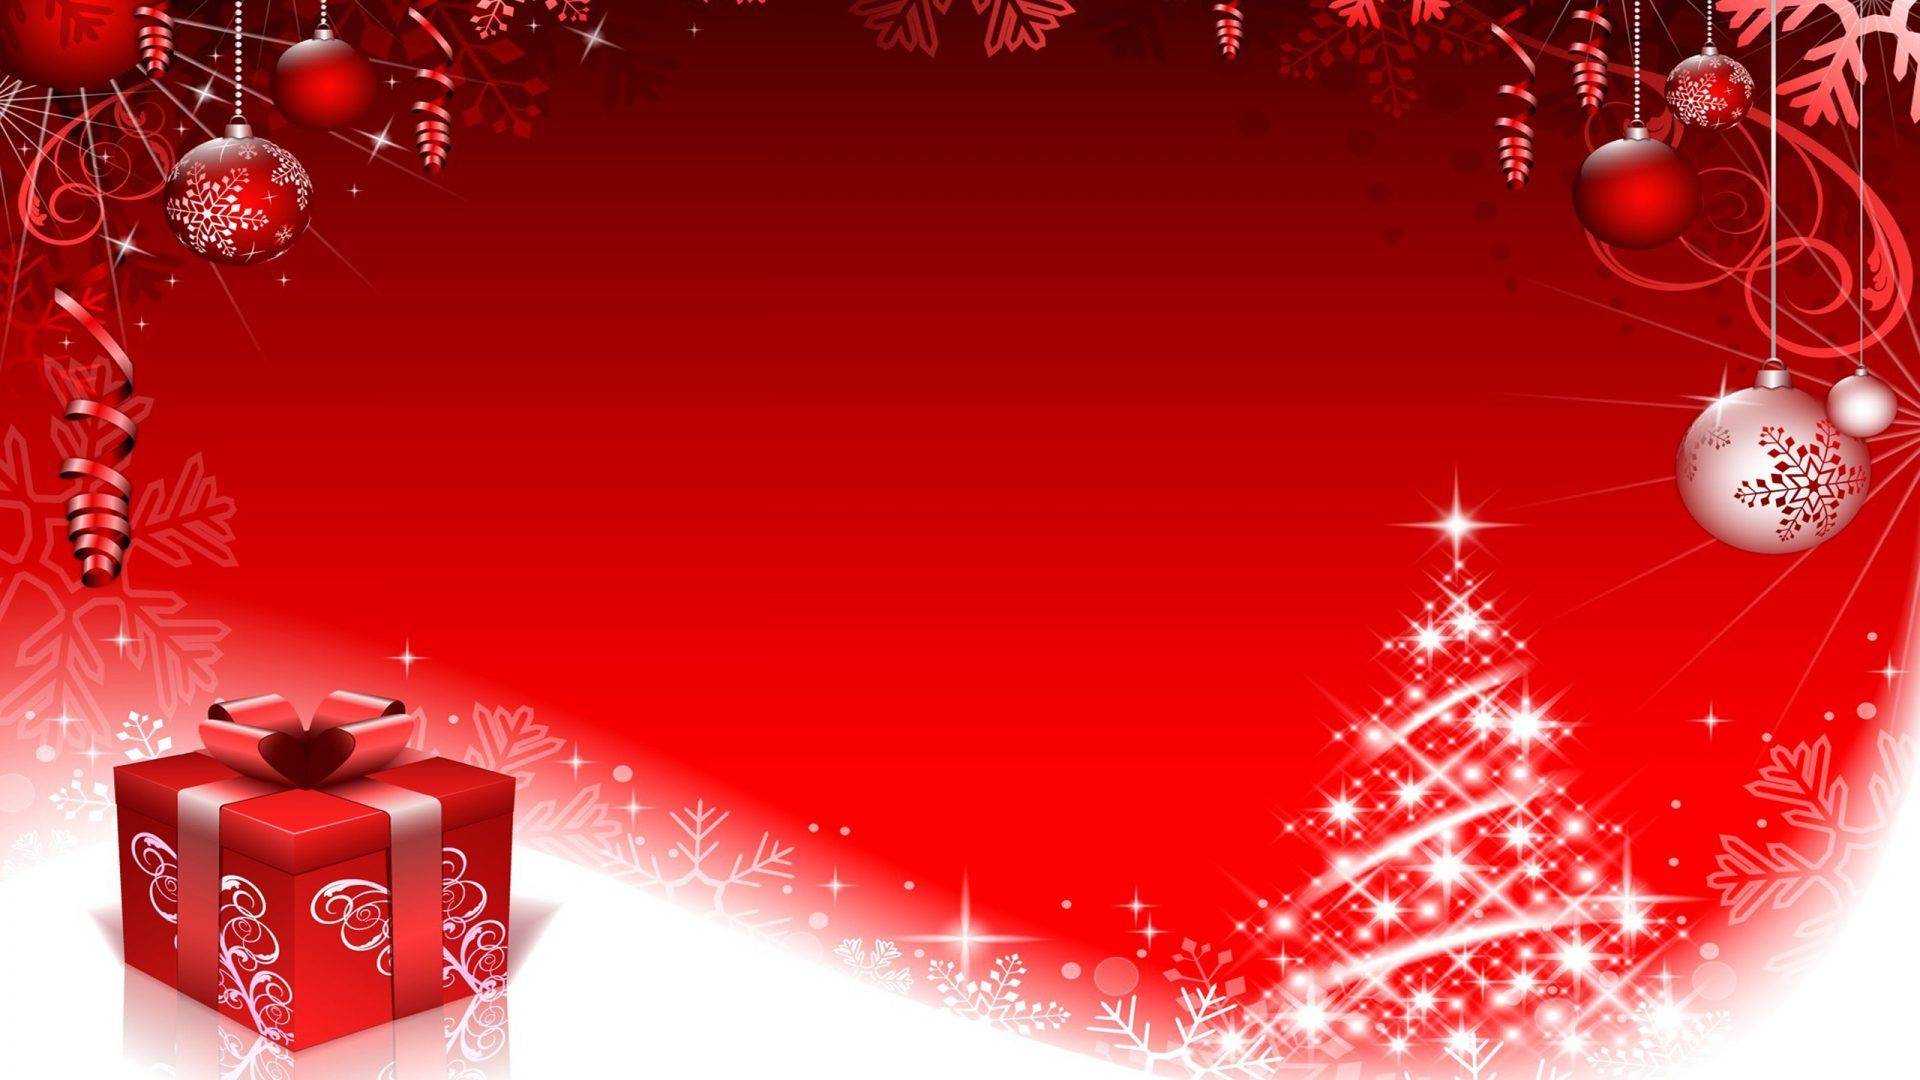 Red Christmas Decorations With Snowflakes Background Image 2560x1600, Wallpaper13.com